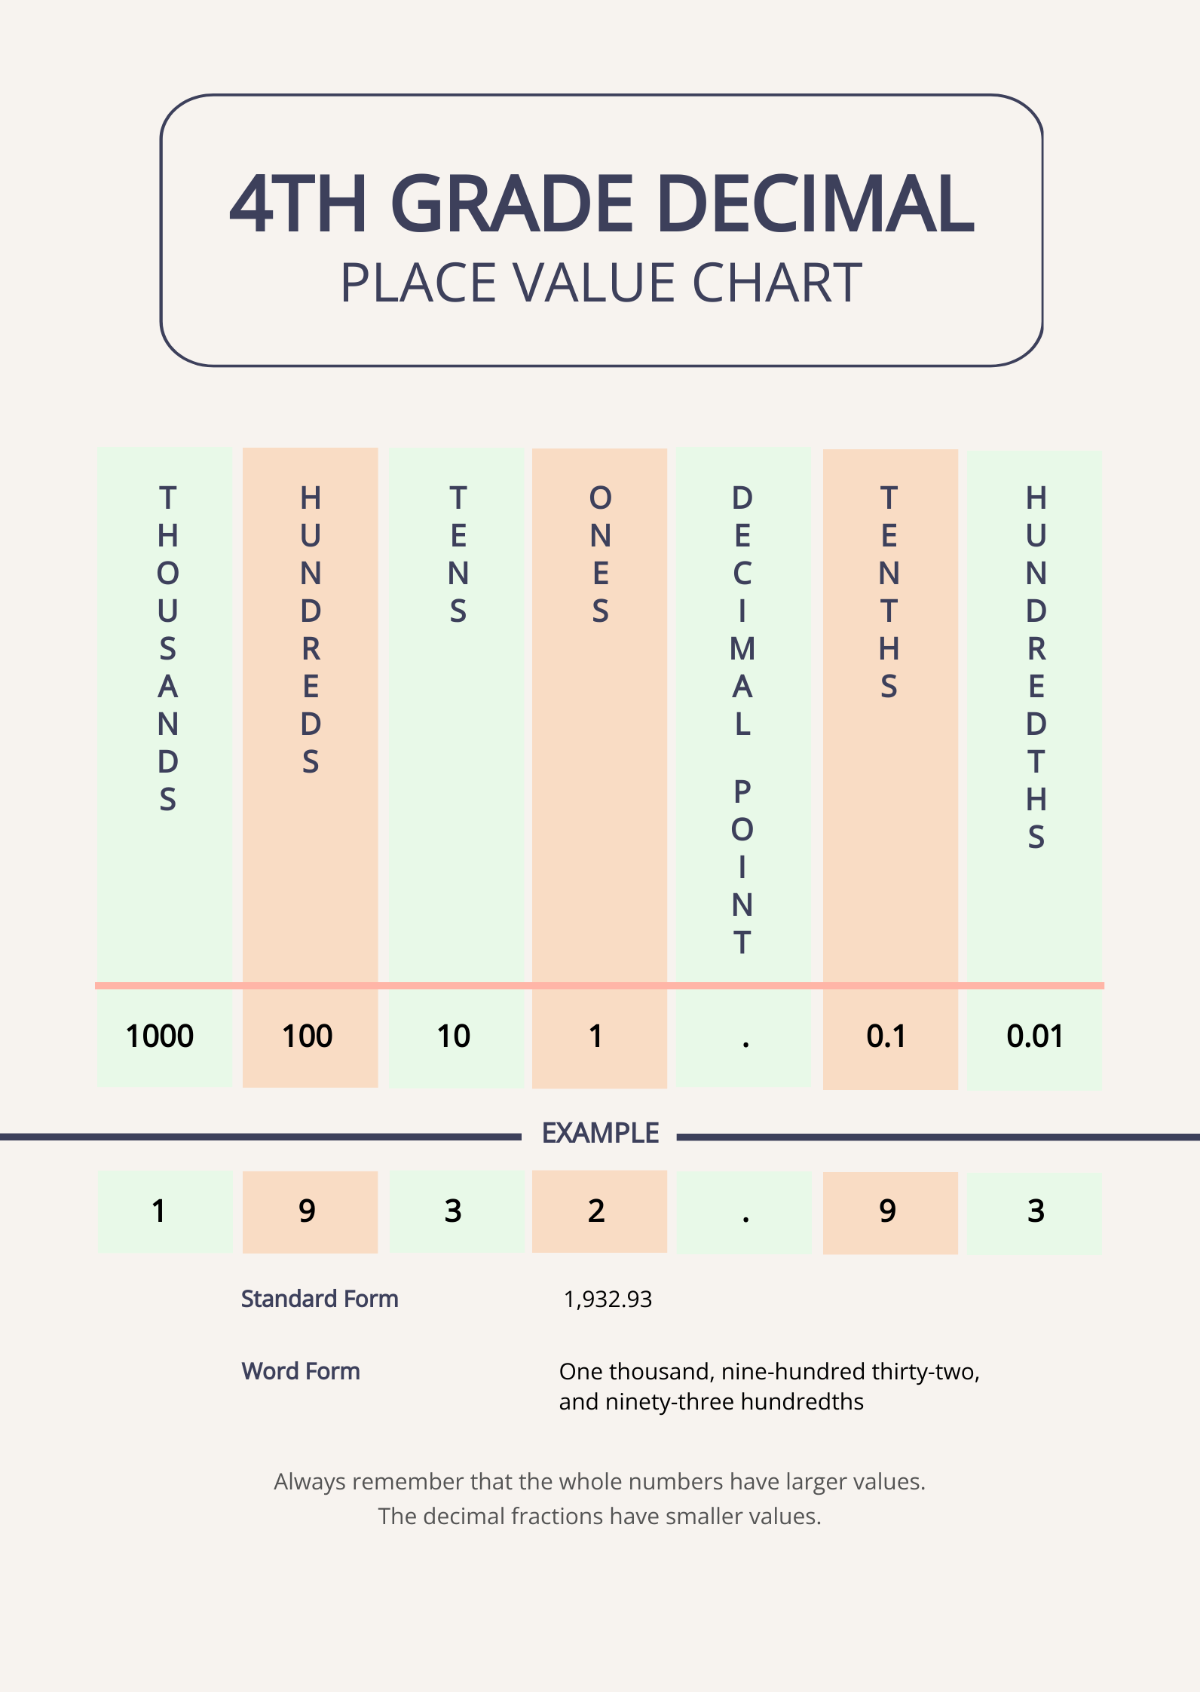 4th Grade Decimal Place Value Chart Template